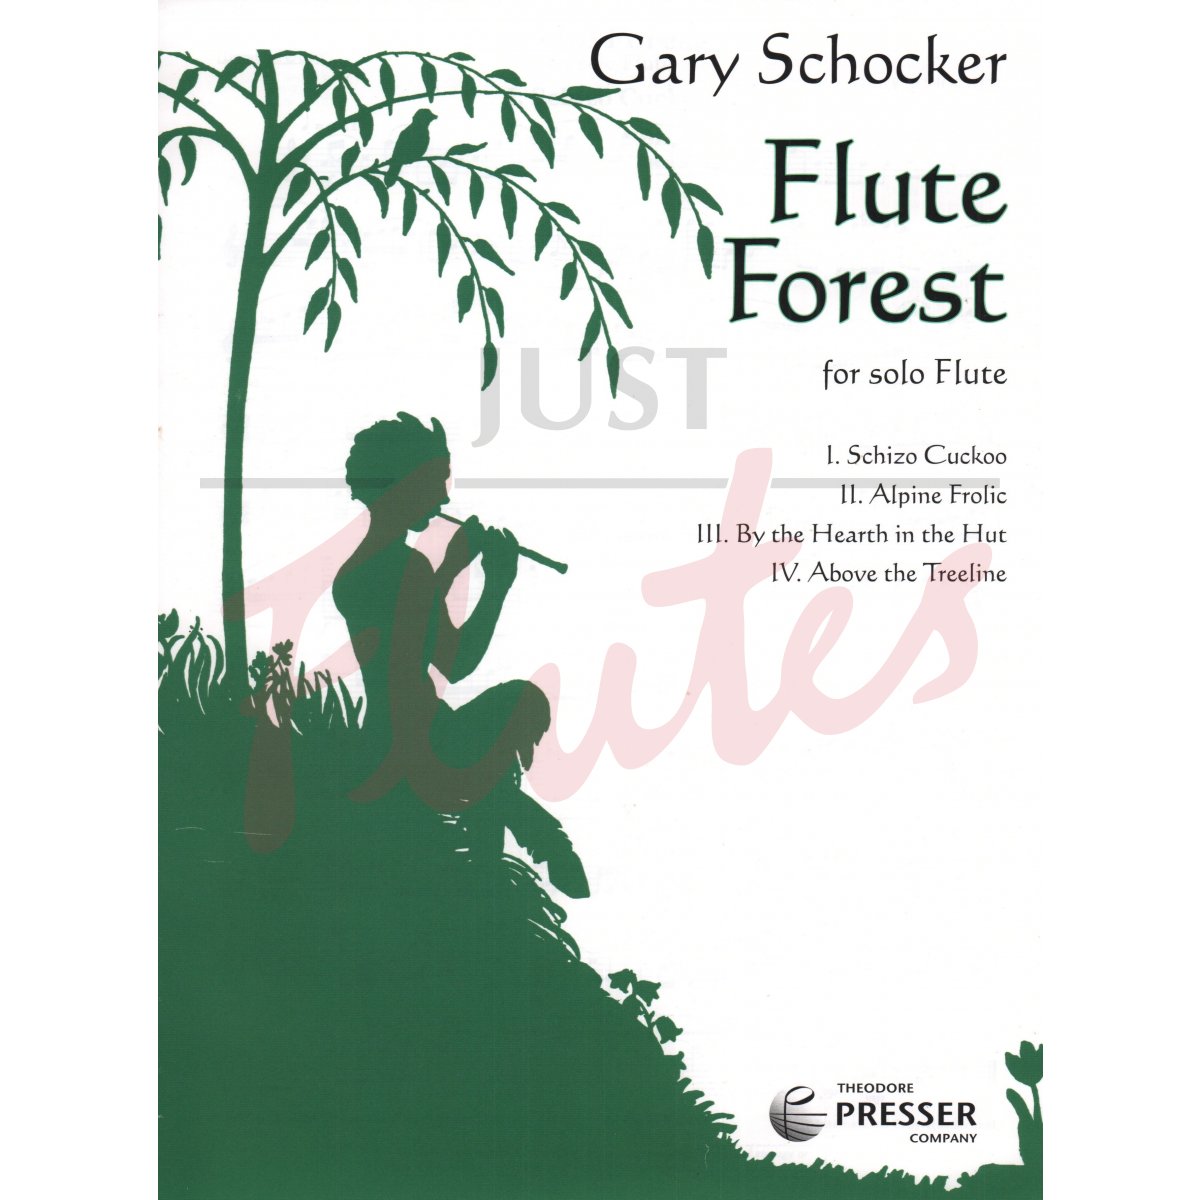 Flute Forest for Solo Flute